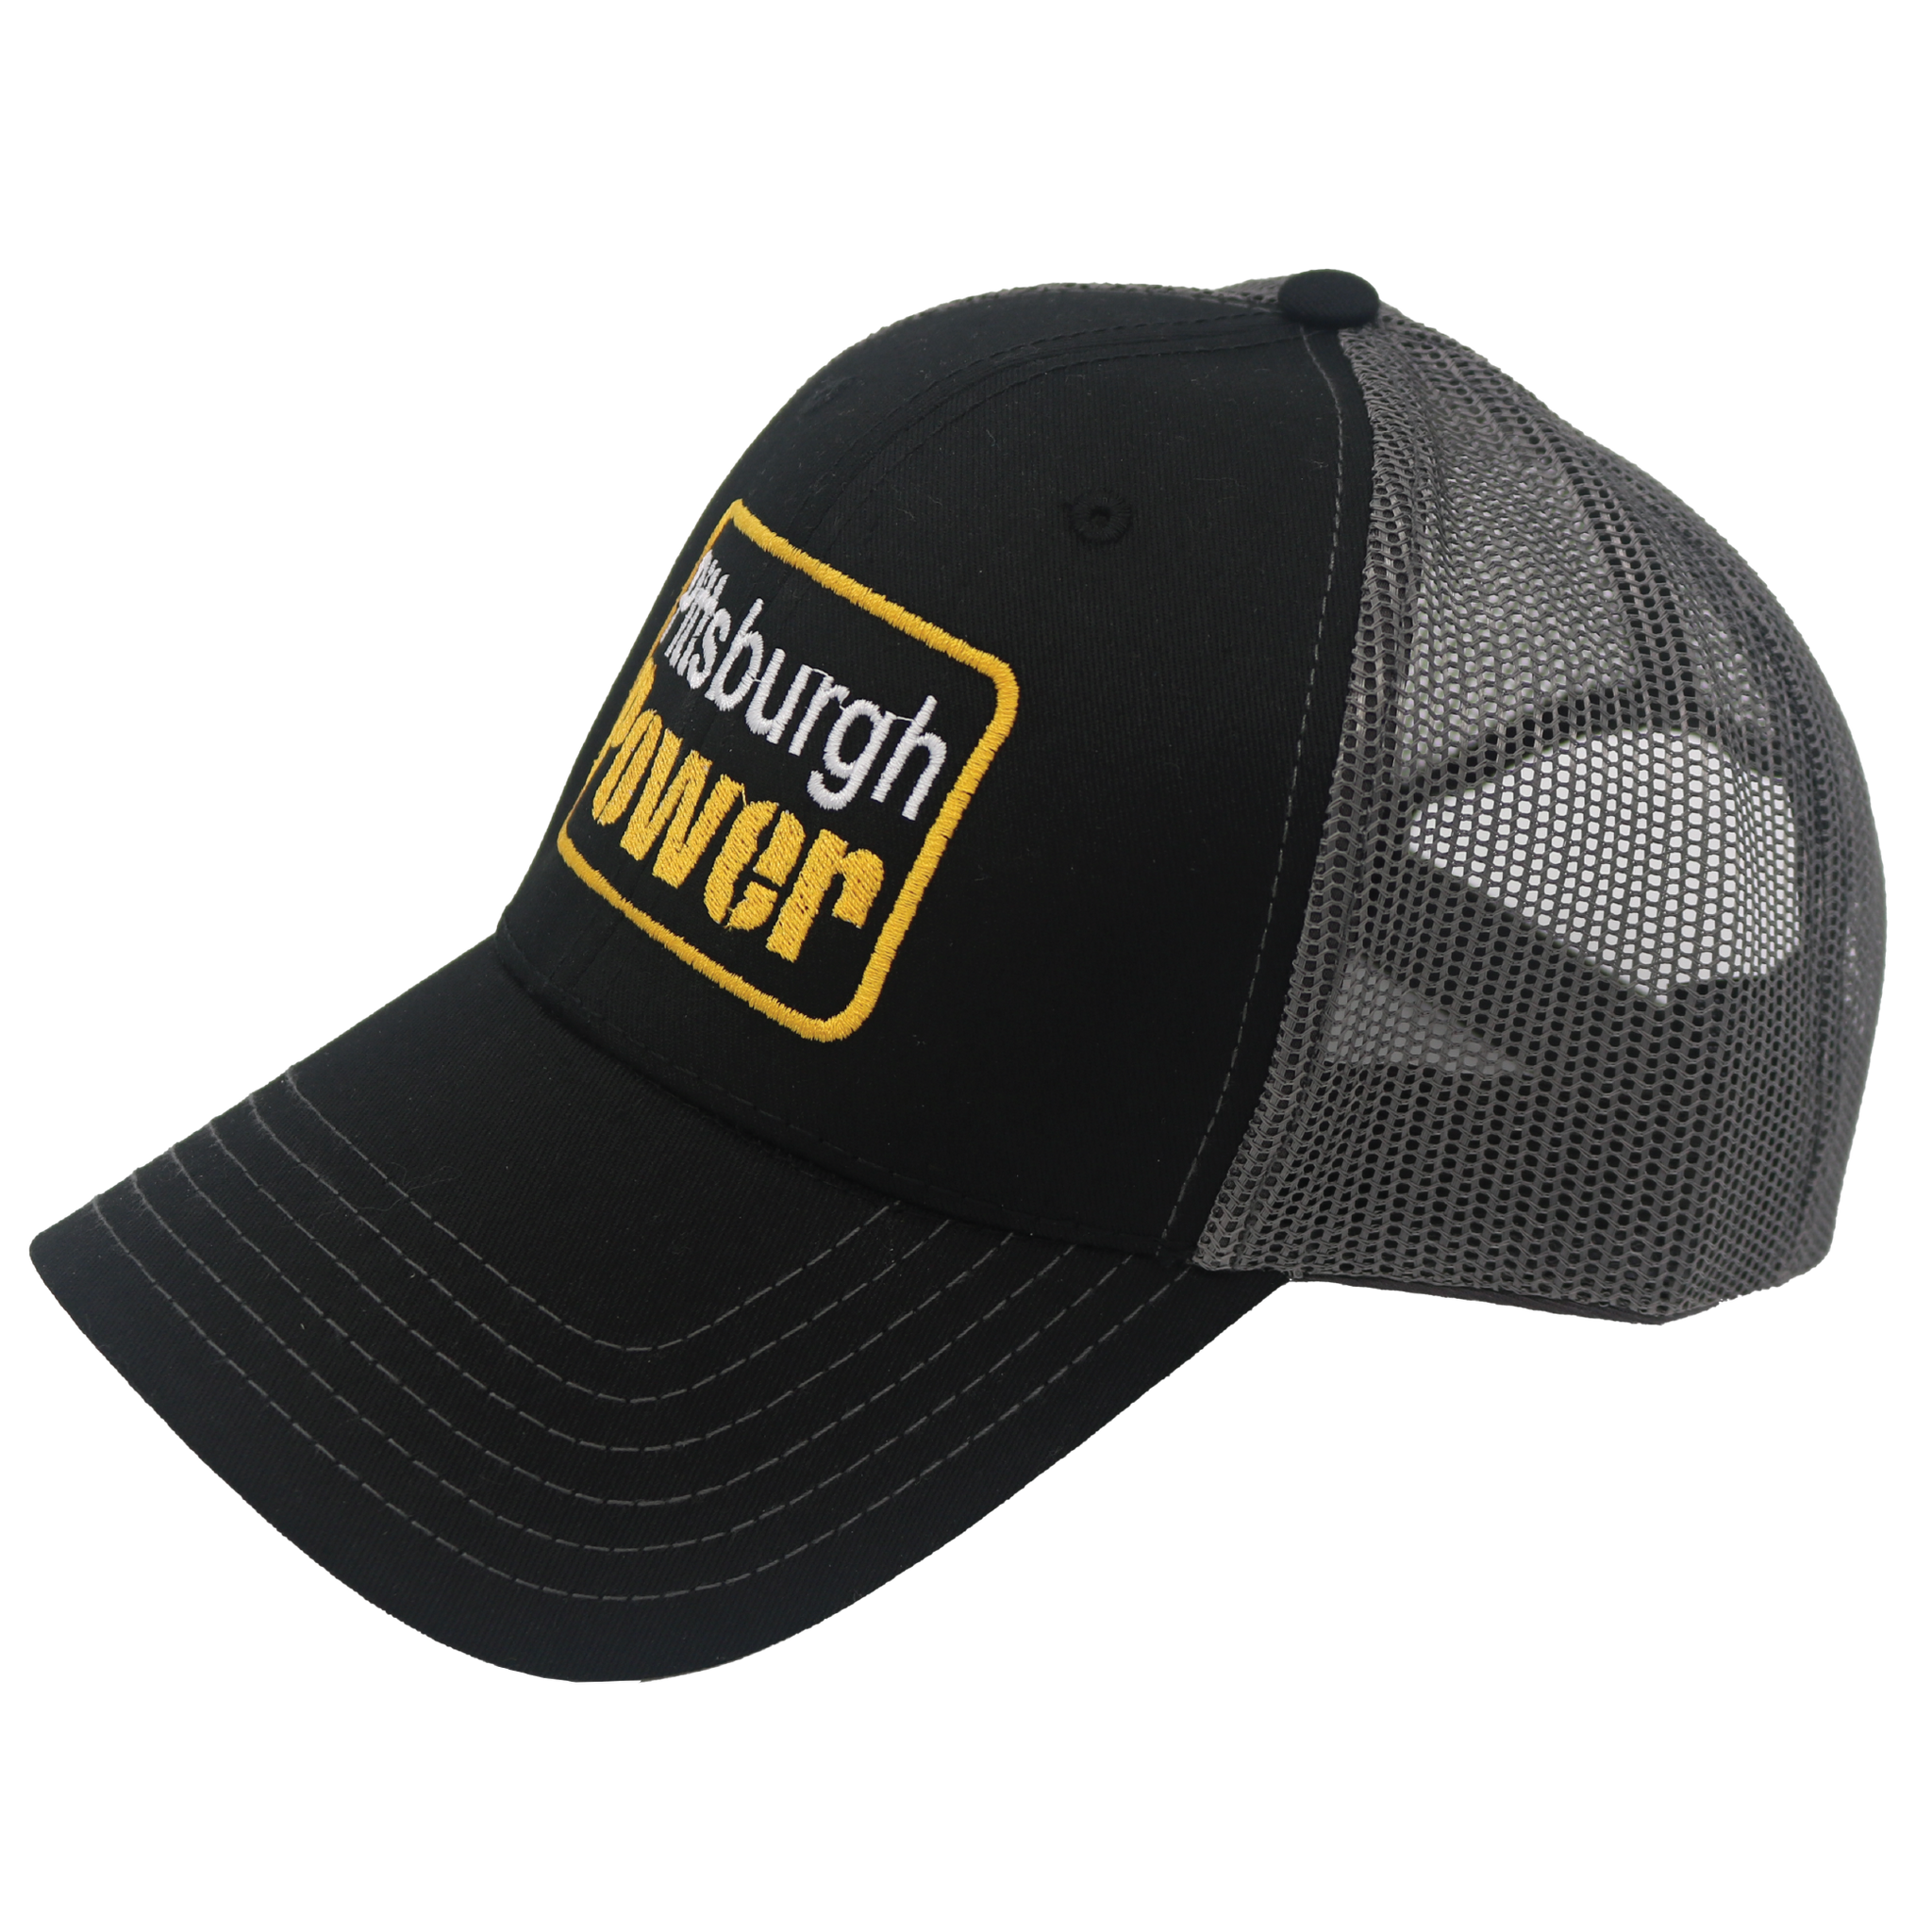 Official Pittsburgh Power Hat